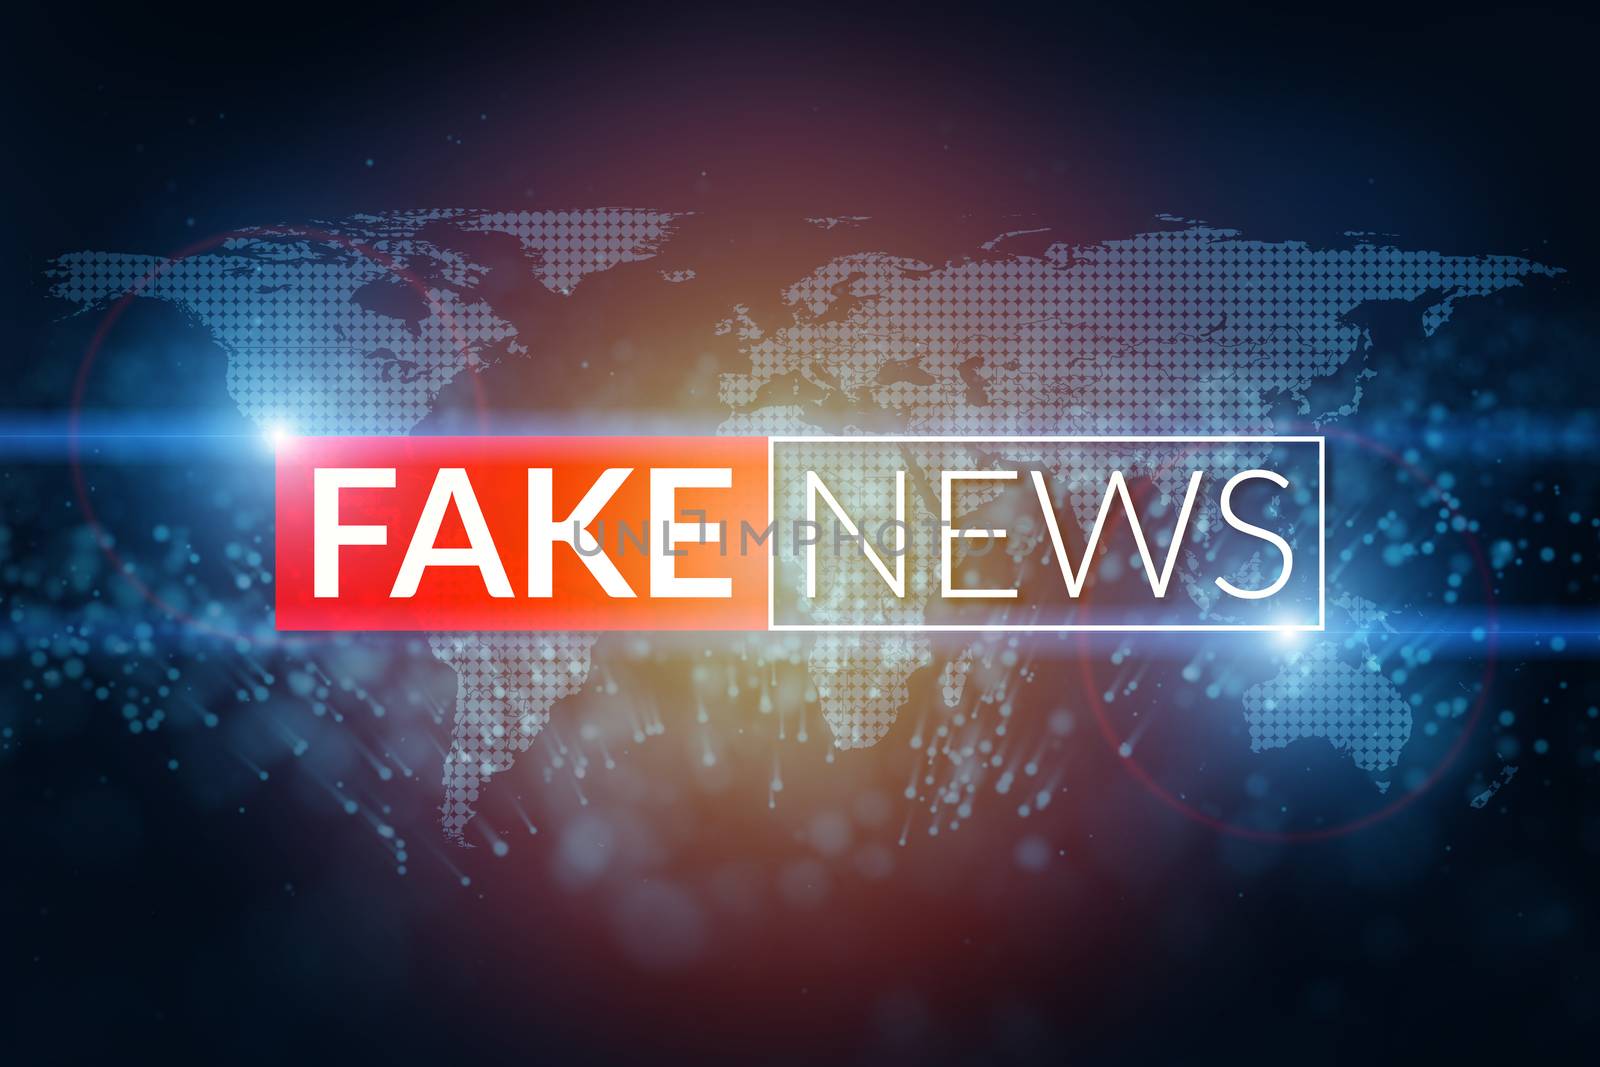 fake news live screen template on digital world map background. by asiandelight